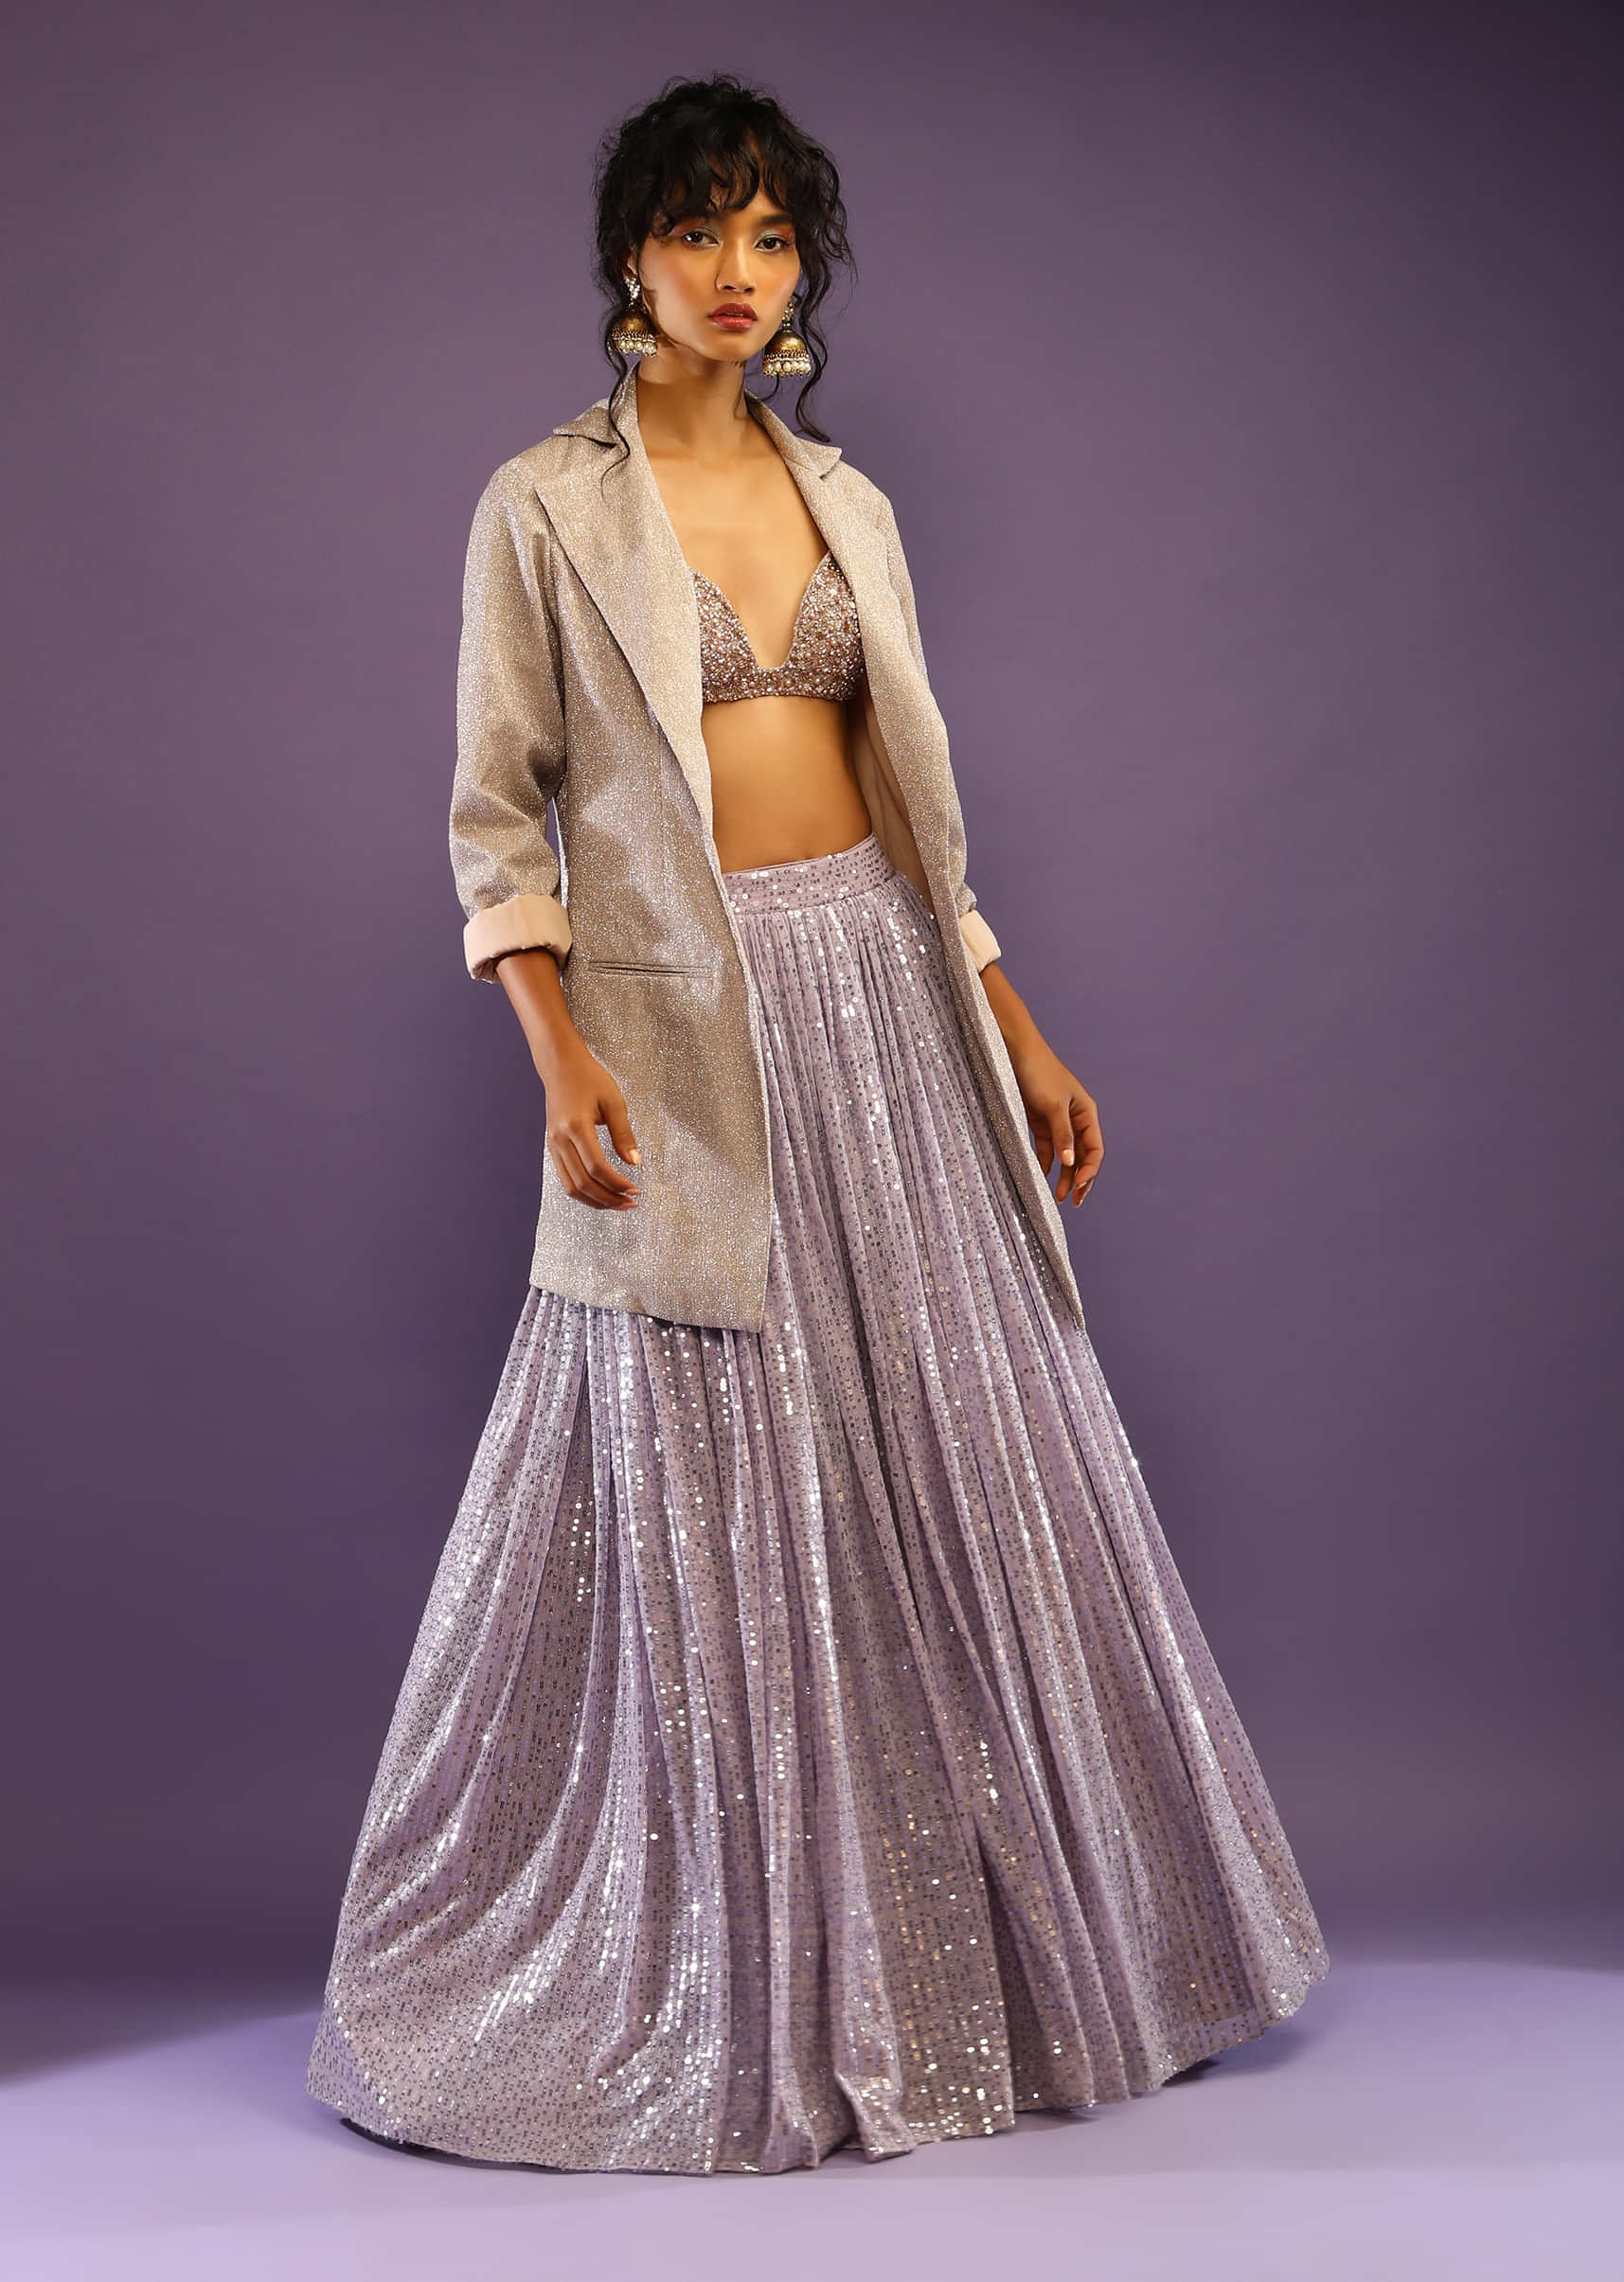 Lavender Sequins Skirt With Embroidered Crop Top And Gold Shimmer Blazer Jacket